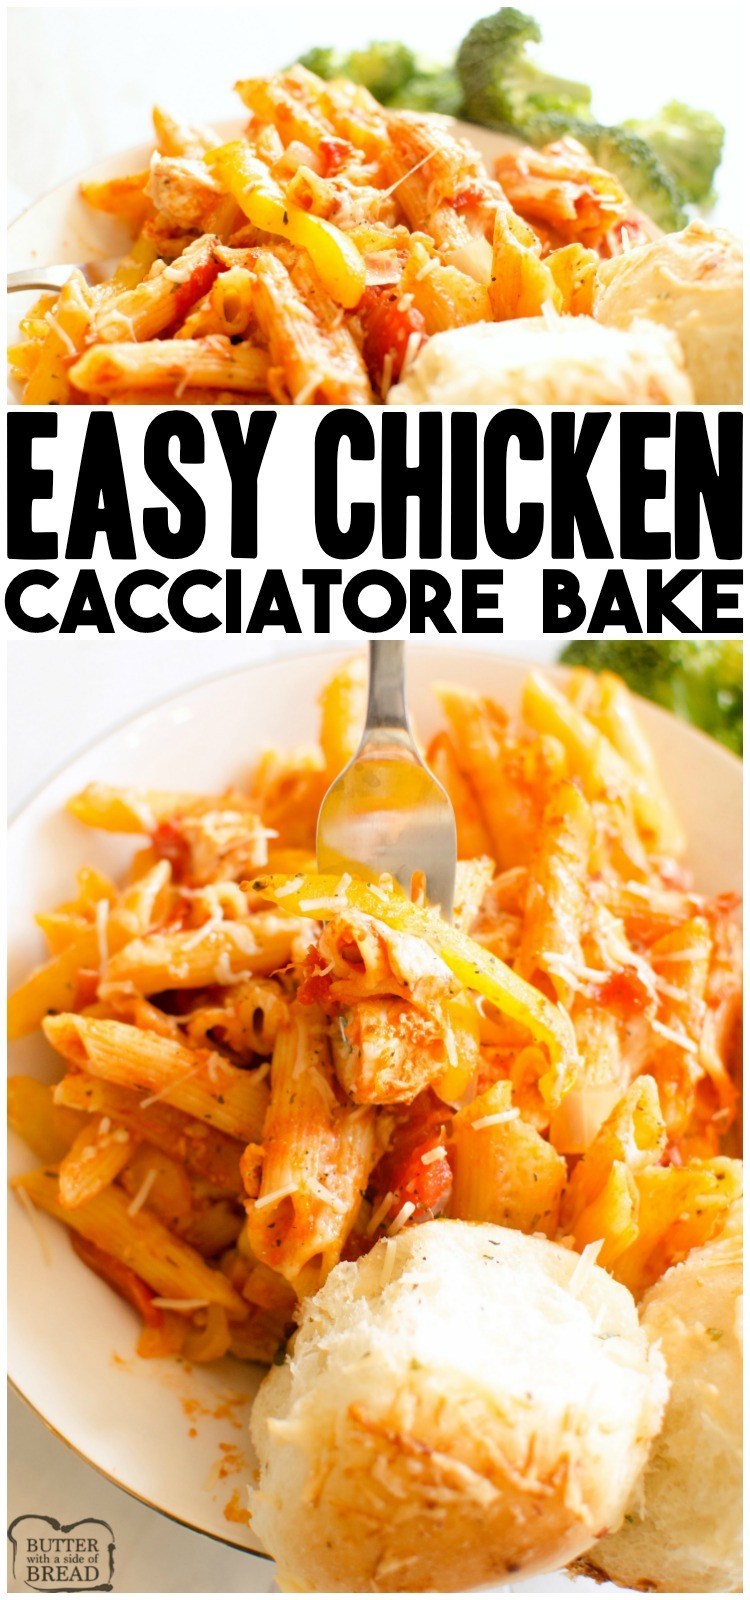 One-Pot Chicken Cacciatore is a simple & delicious chicken dinner. Easy Chicken Cacciatore recipe baked with pasta, chicken, tomatoes, peppers & cheese in about an hour. Quick & easy chicken recipe perfect for weeknight dinners. 